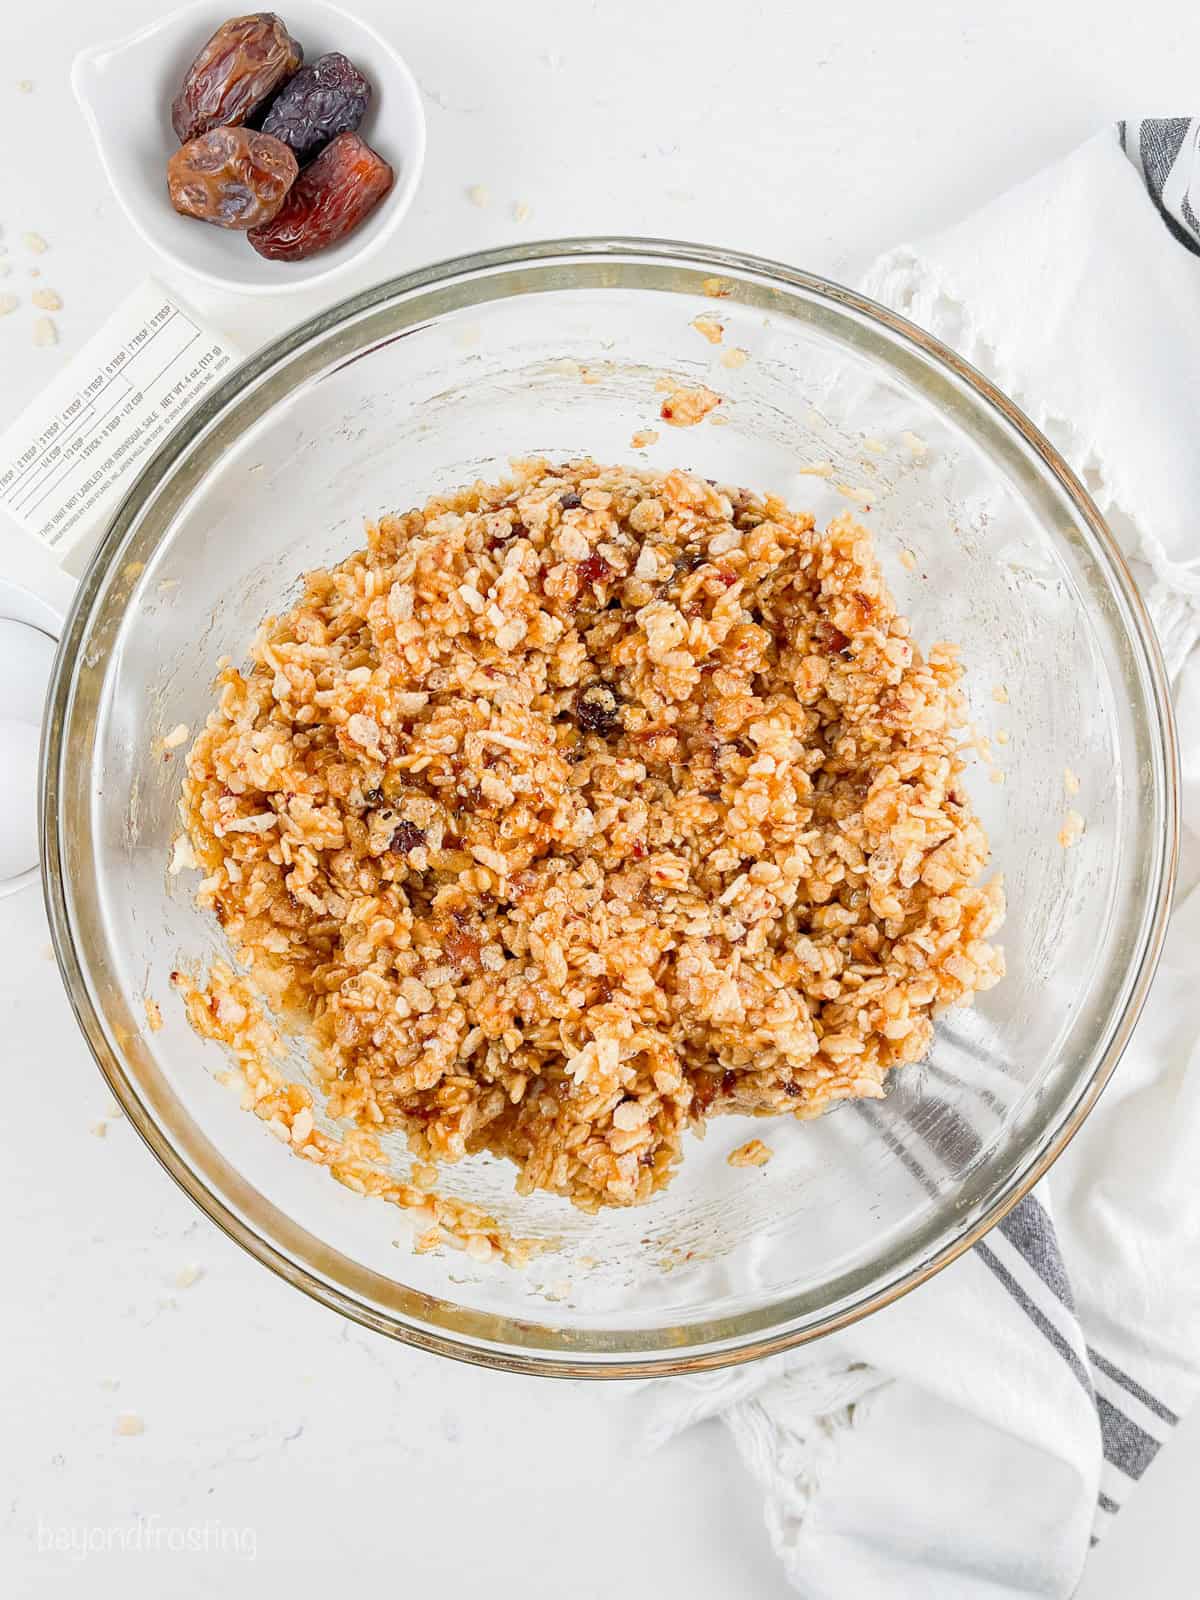 Rice Krispies and the warm date mixture combined in a glass bowl.